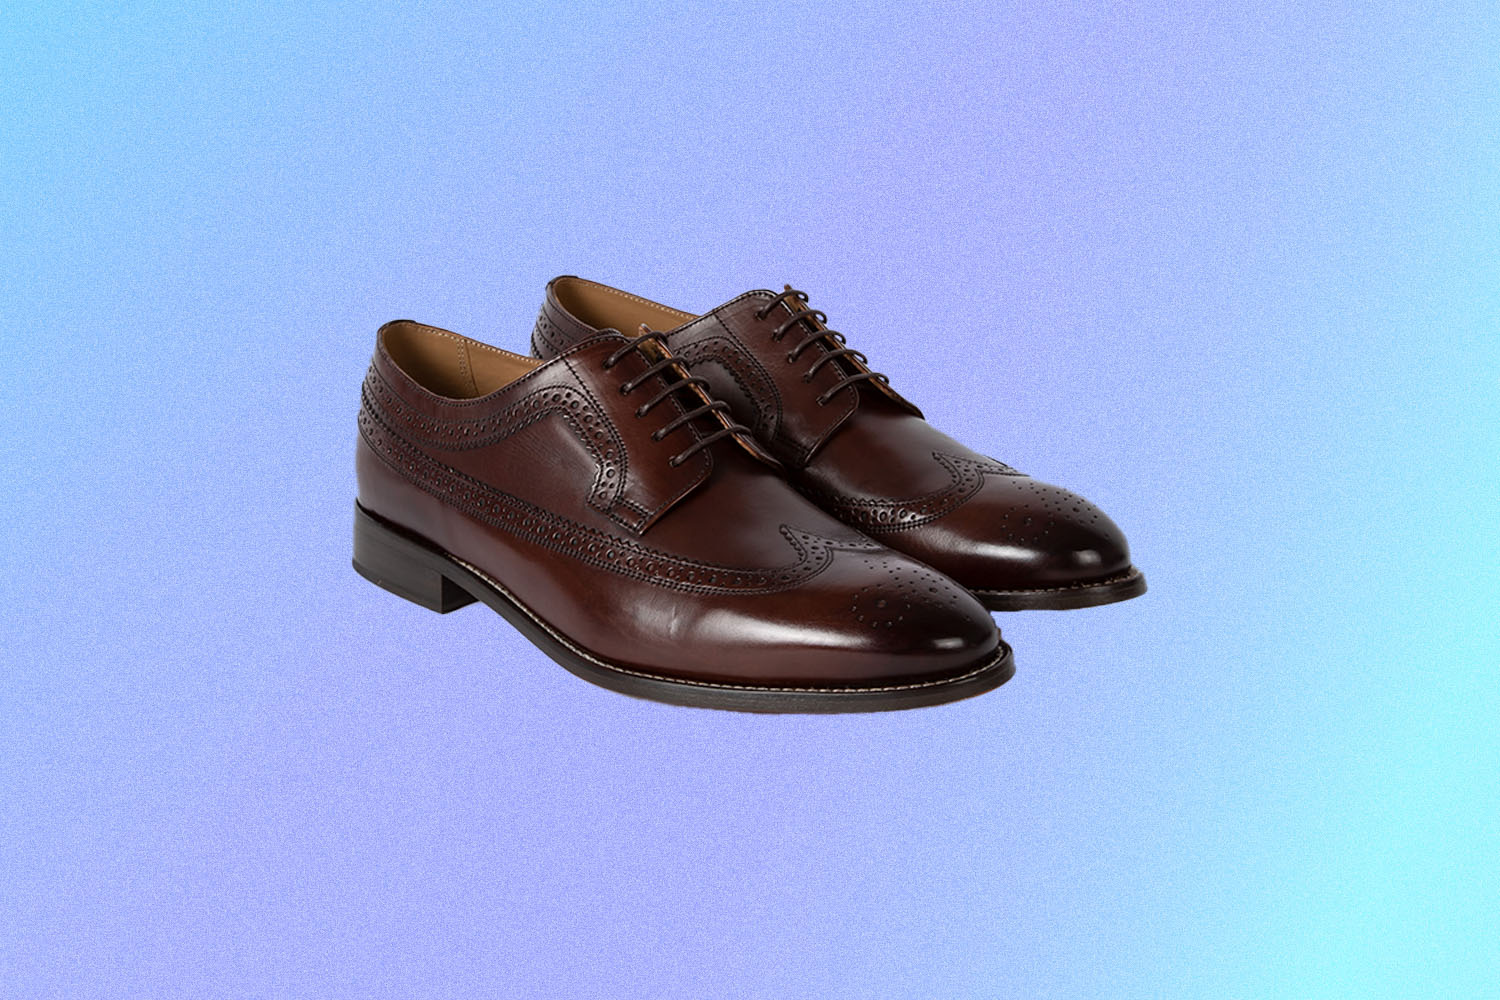 a pair of brogue dress shoes in brown leather on a multi-colored blue-purple background